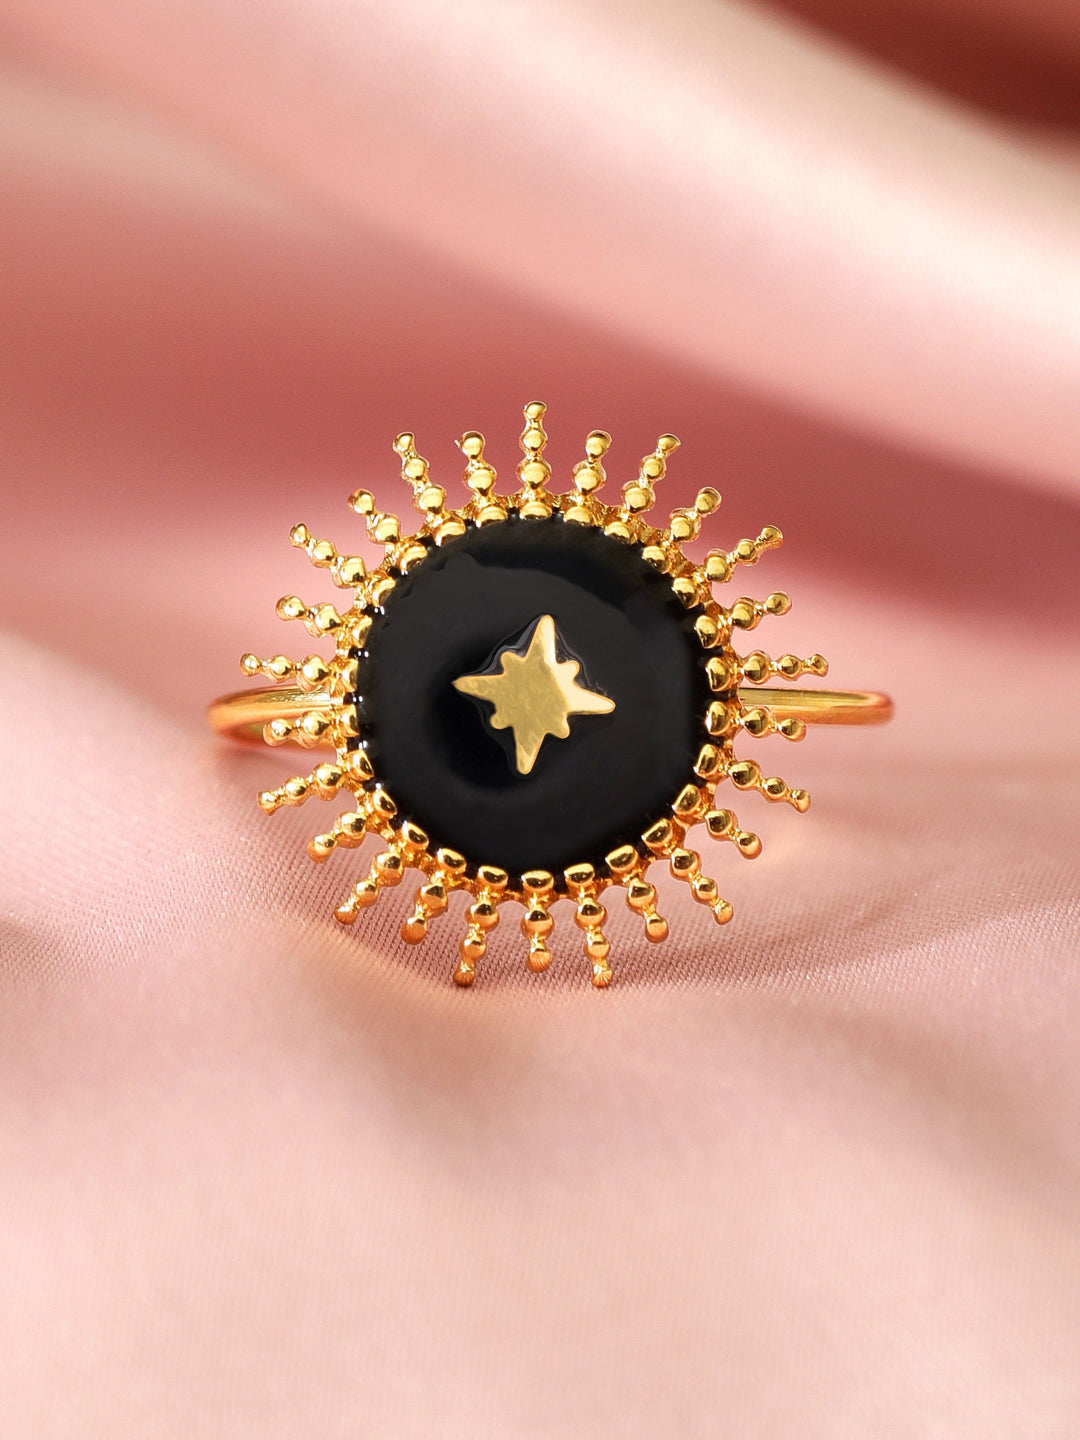 Rubans Voguish 18K Gold Plated Stainless Steel Black Enamel With Star Ring. Rings